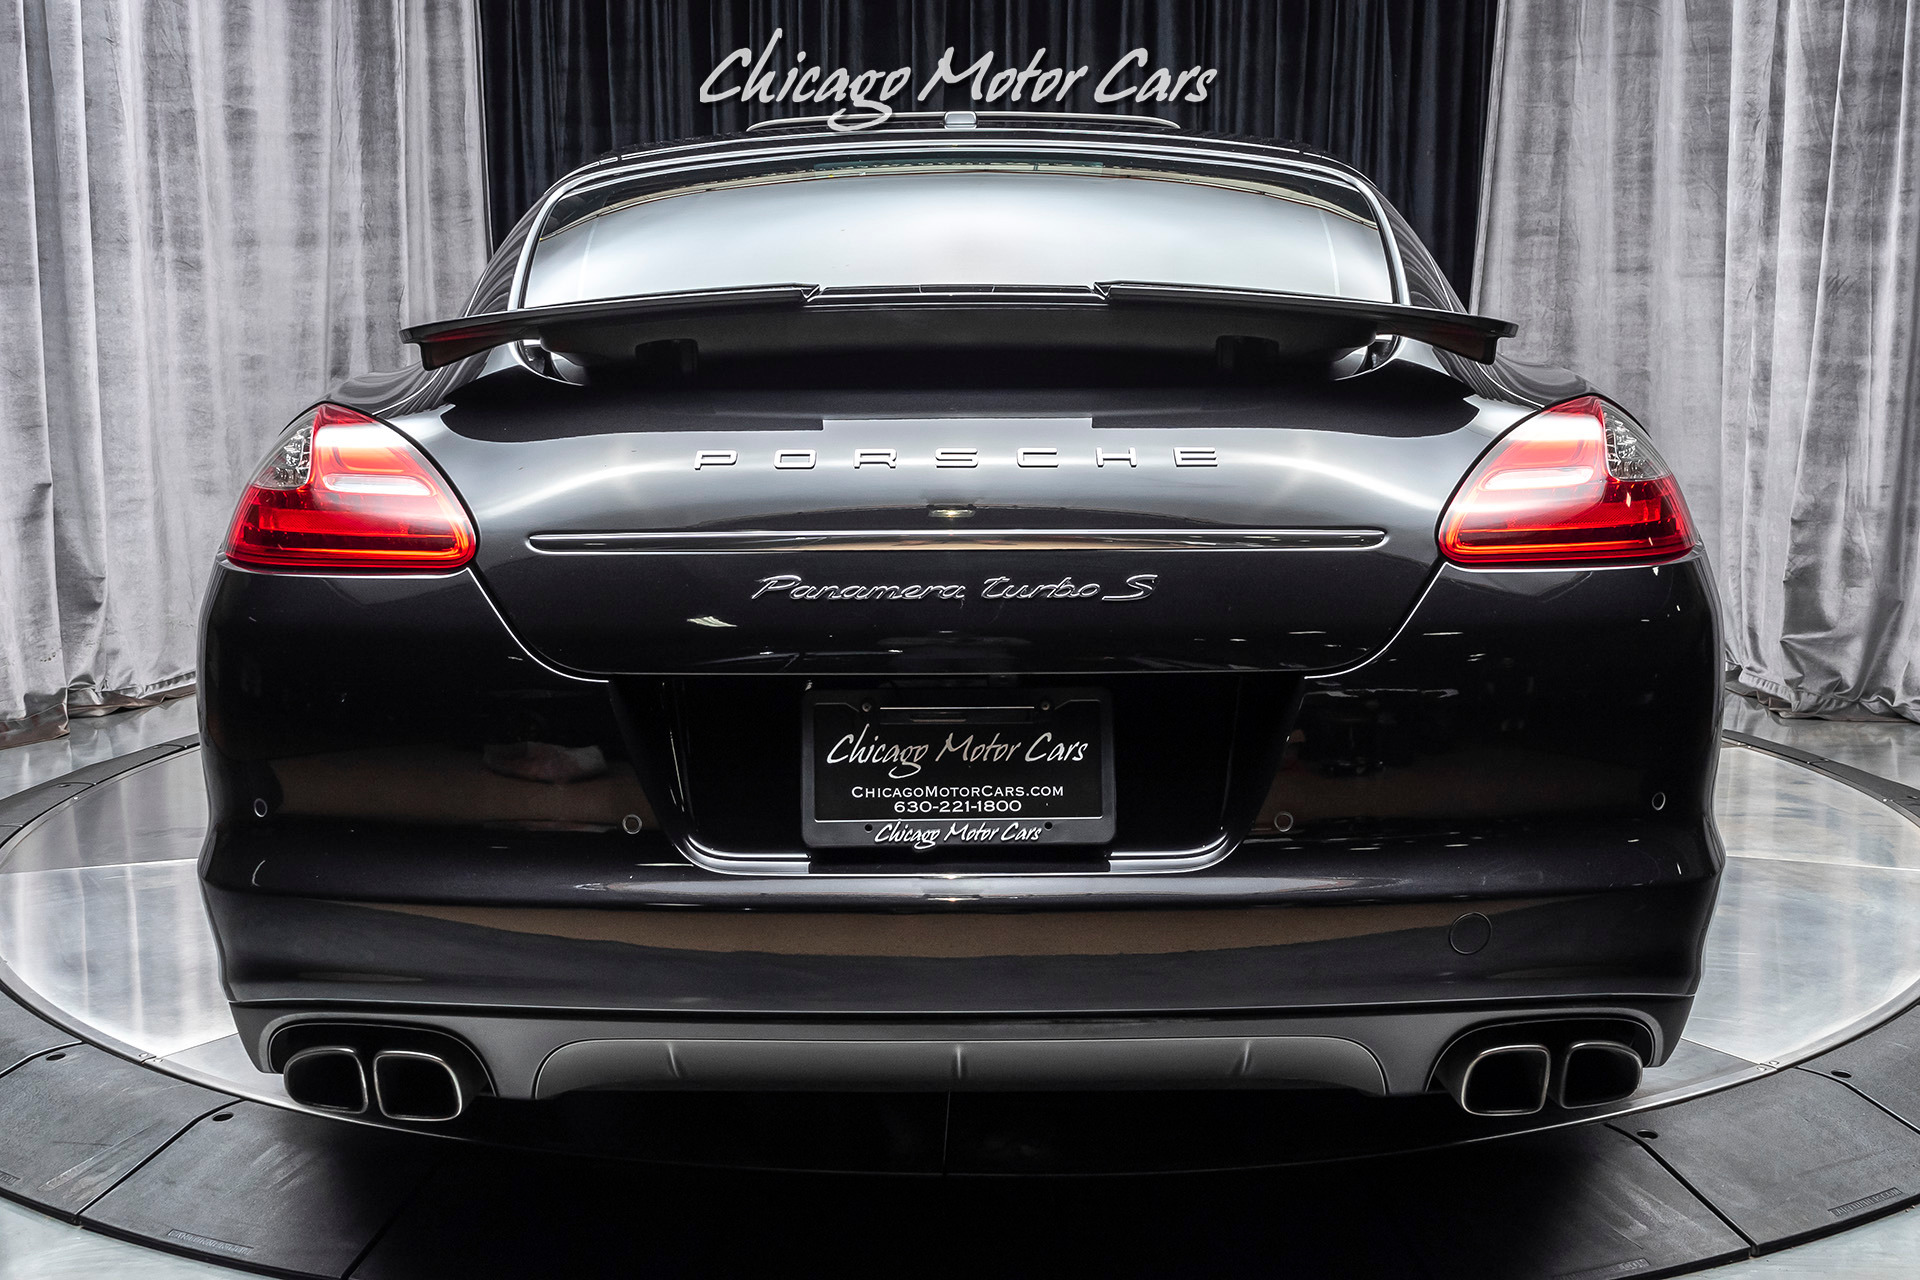 Used-2013-Porsche-Panamera-Turbo-S-Hatchback-Original-MSRP-198k-LOADED-WITH-FACTORY-OPTIONS